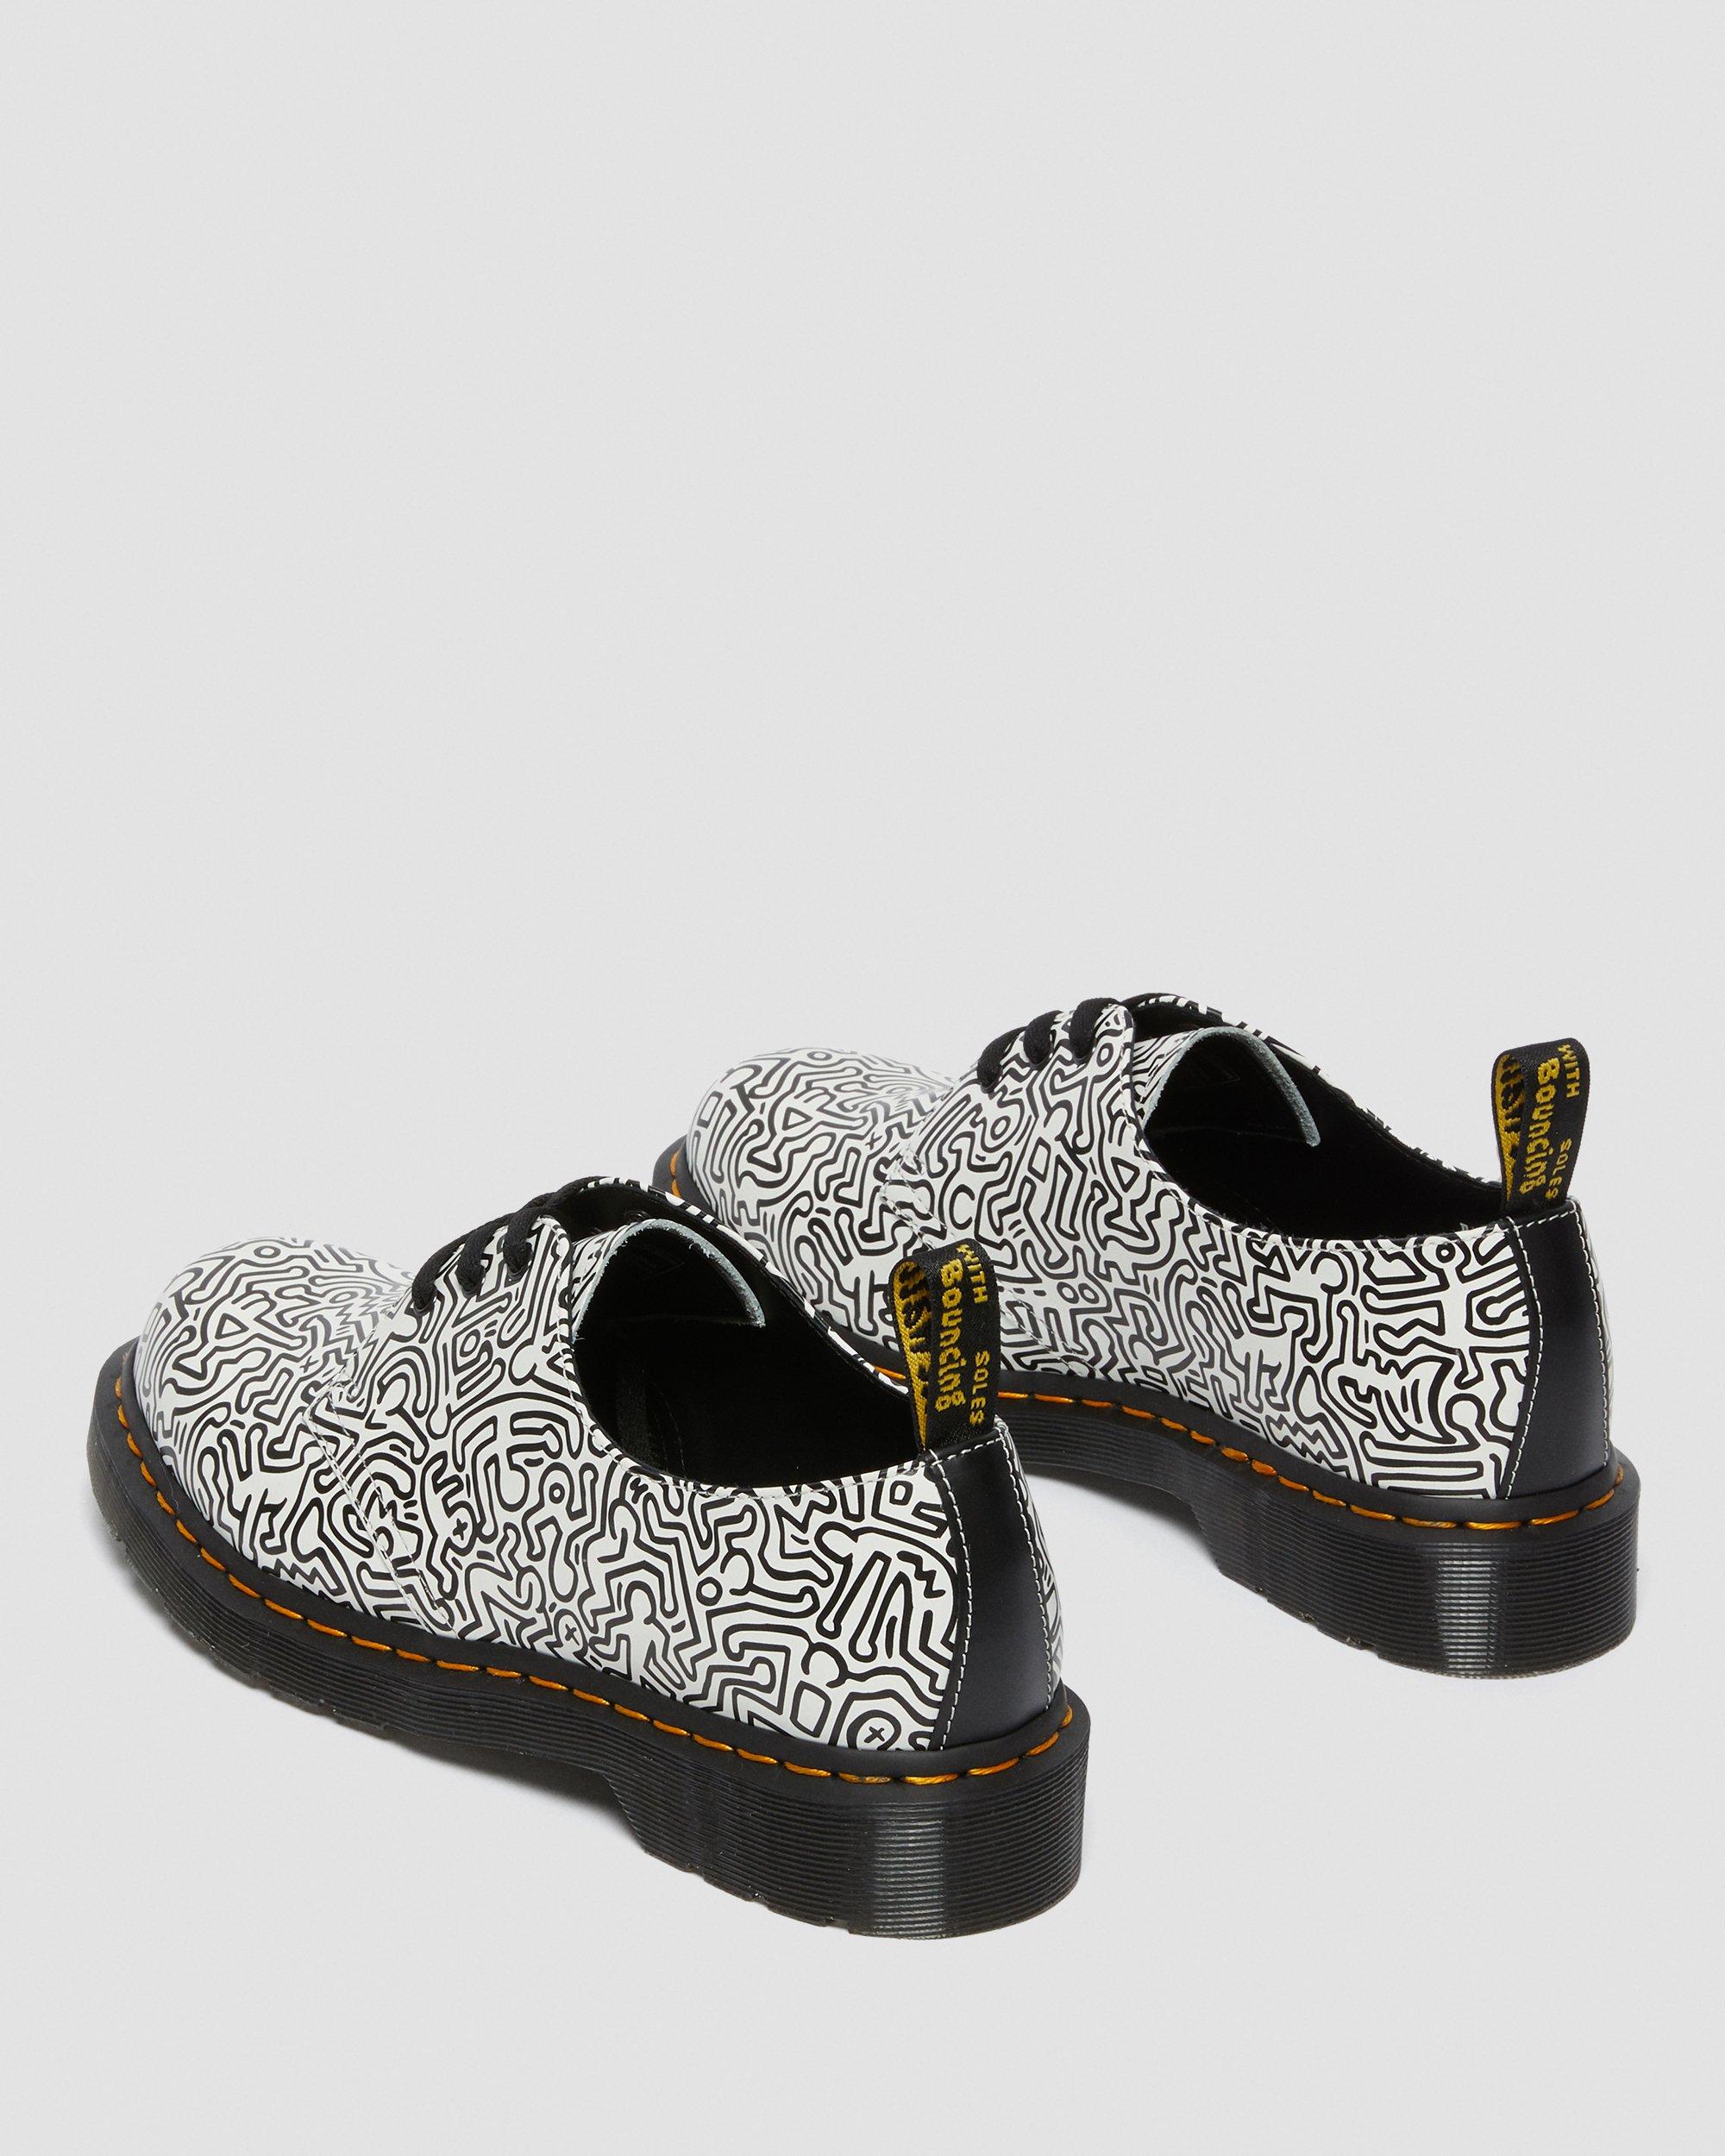 1461 Keith Haring Black & White Printed Leather Shoes in Black+White